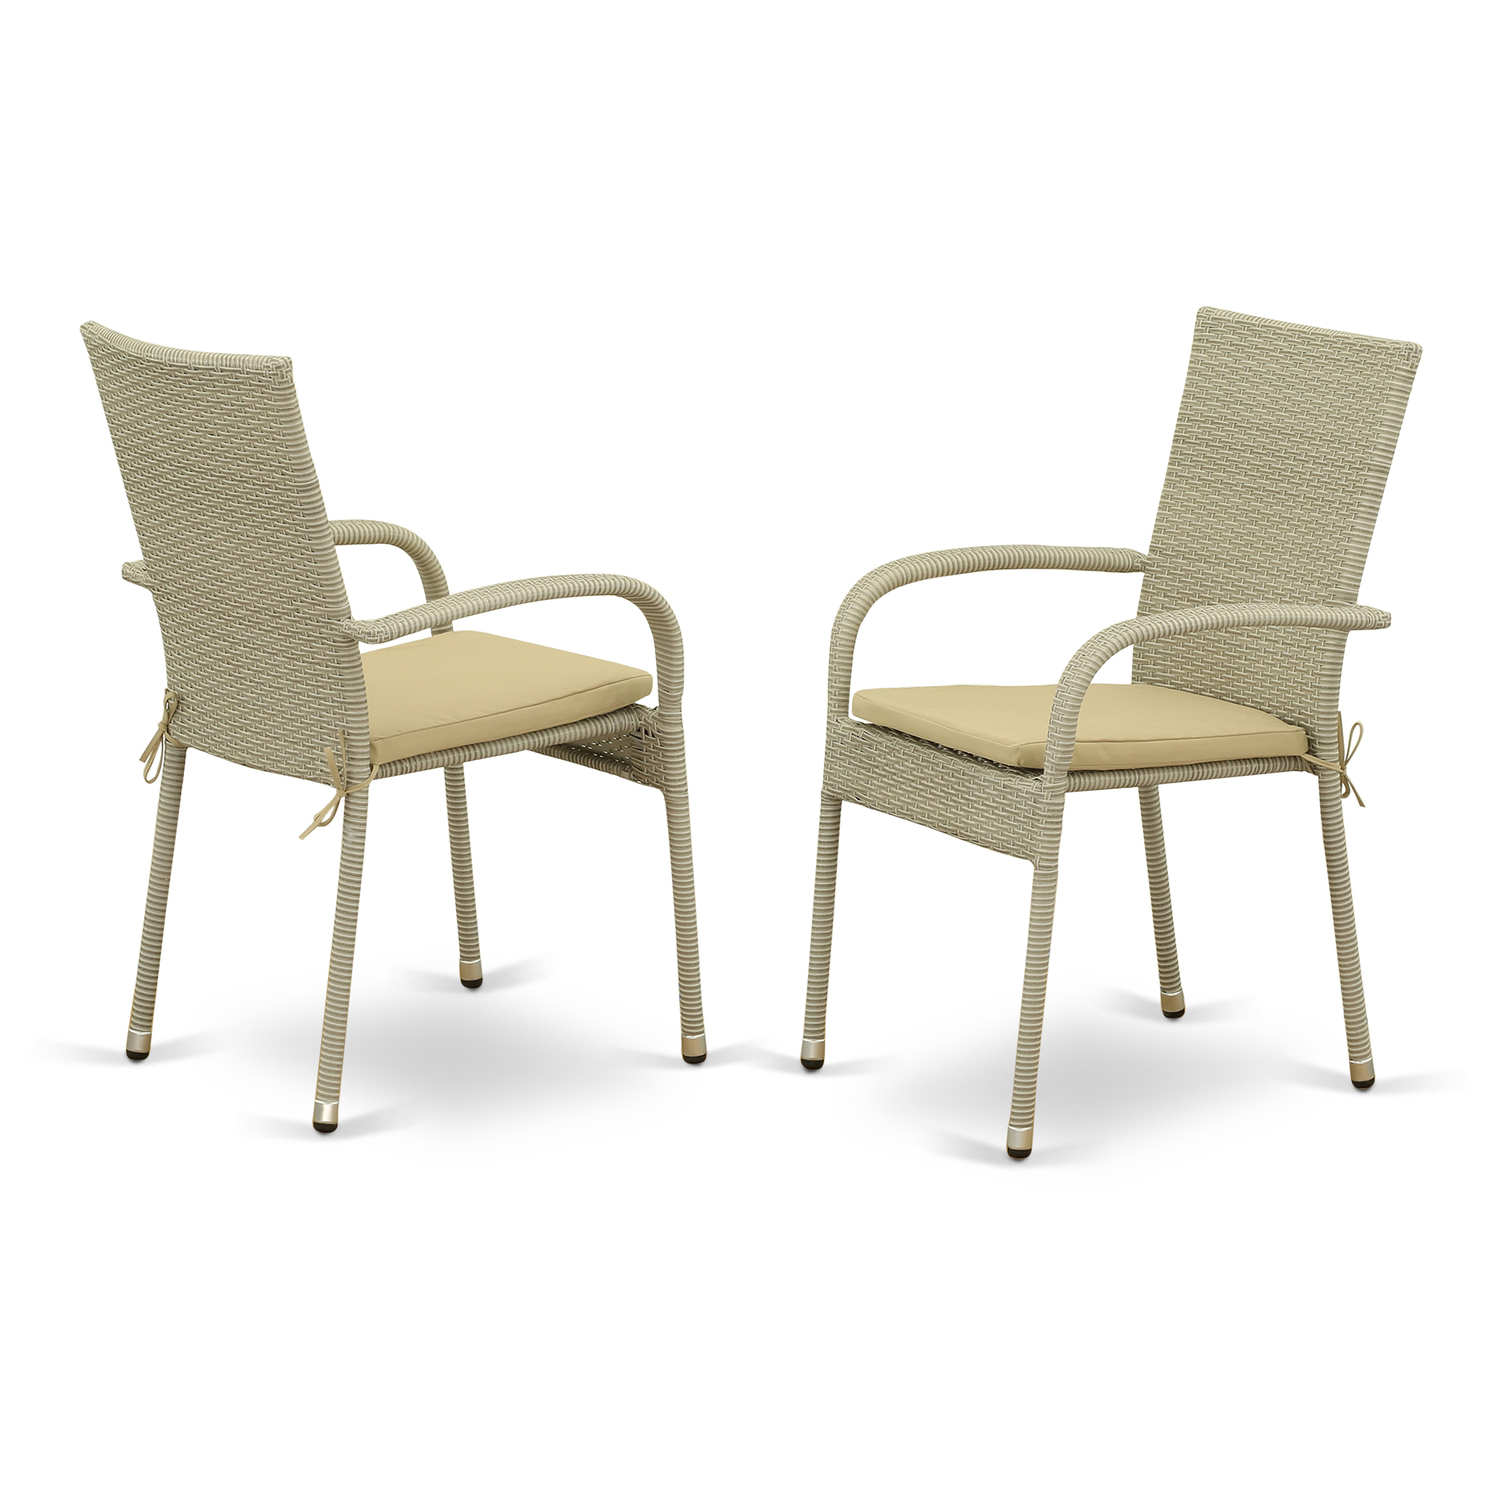 East West Furniture Gudhjem Metal Patio Dining Chairs in Natural (Set of 2) - image 2 of 3